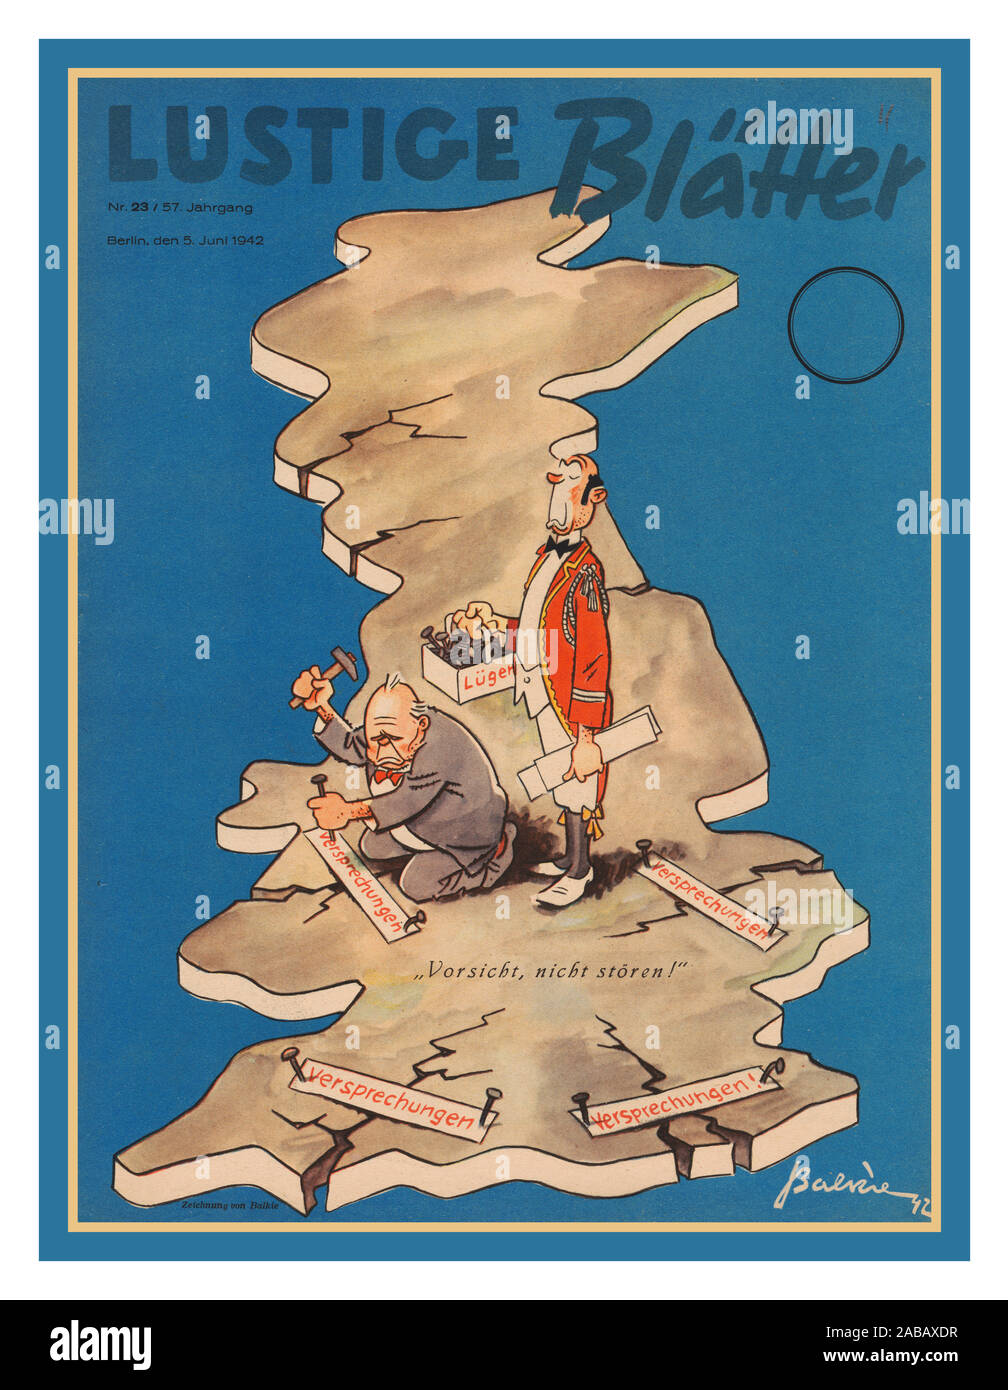 Vintage Nazi WW2 MAP GREAT BRITAIN CHURCHILL  German Propaganda World War II  illustration map of UK from Nazi German satirical magazine, published in June 1942, during a lull in the Blitz. An unhappy Churchill sits astride a shattered England, patching the country together with 'versprechungen' and 'lugen' - “promises and lies”. The small centre caption reads, 'Careful, don't interfere.' Stock Photo